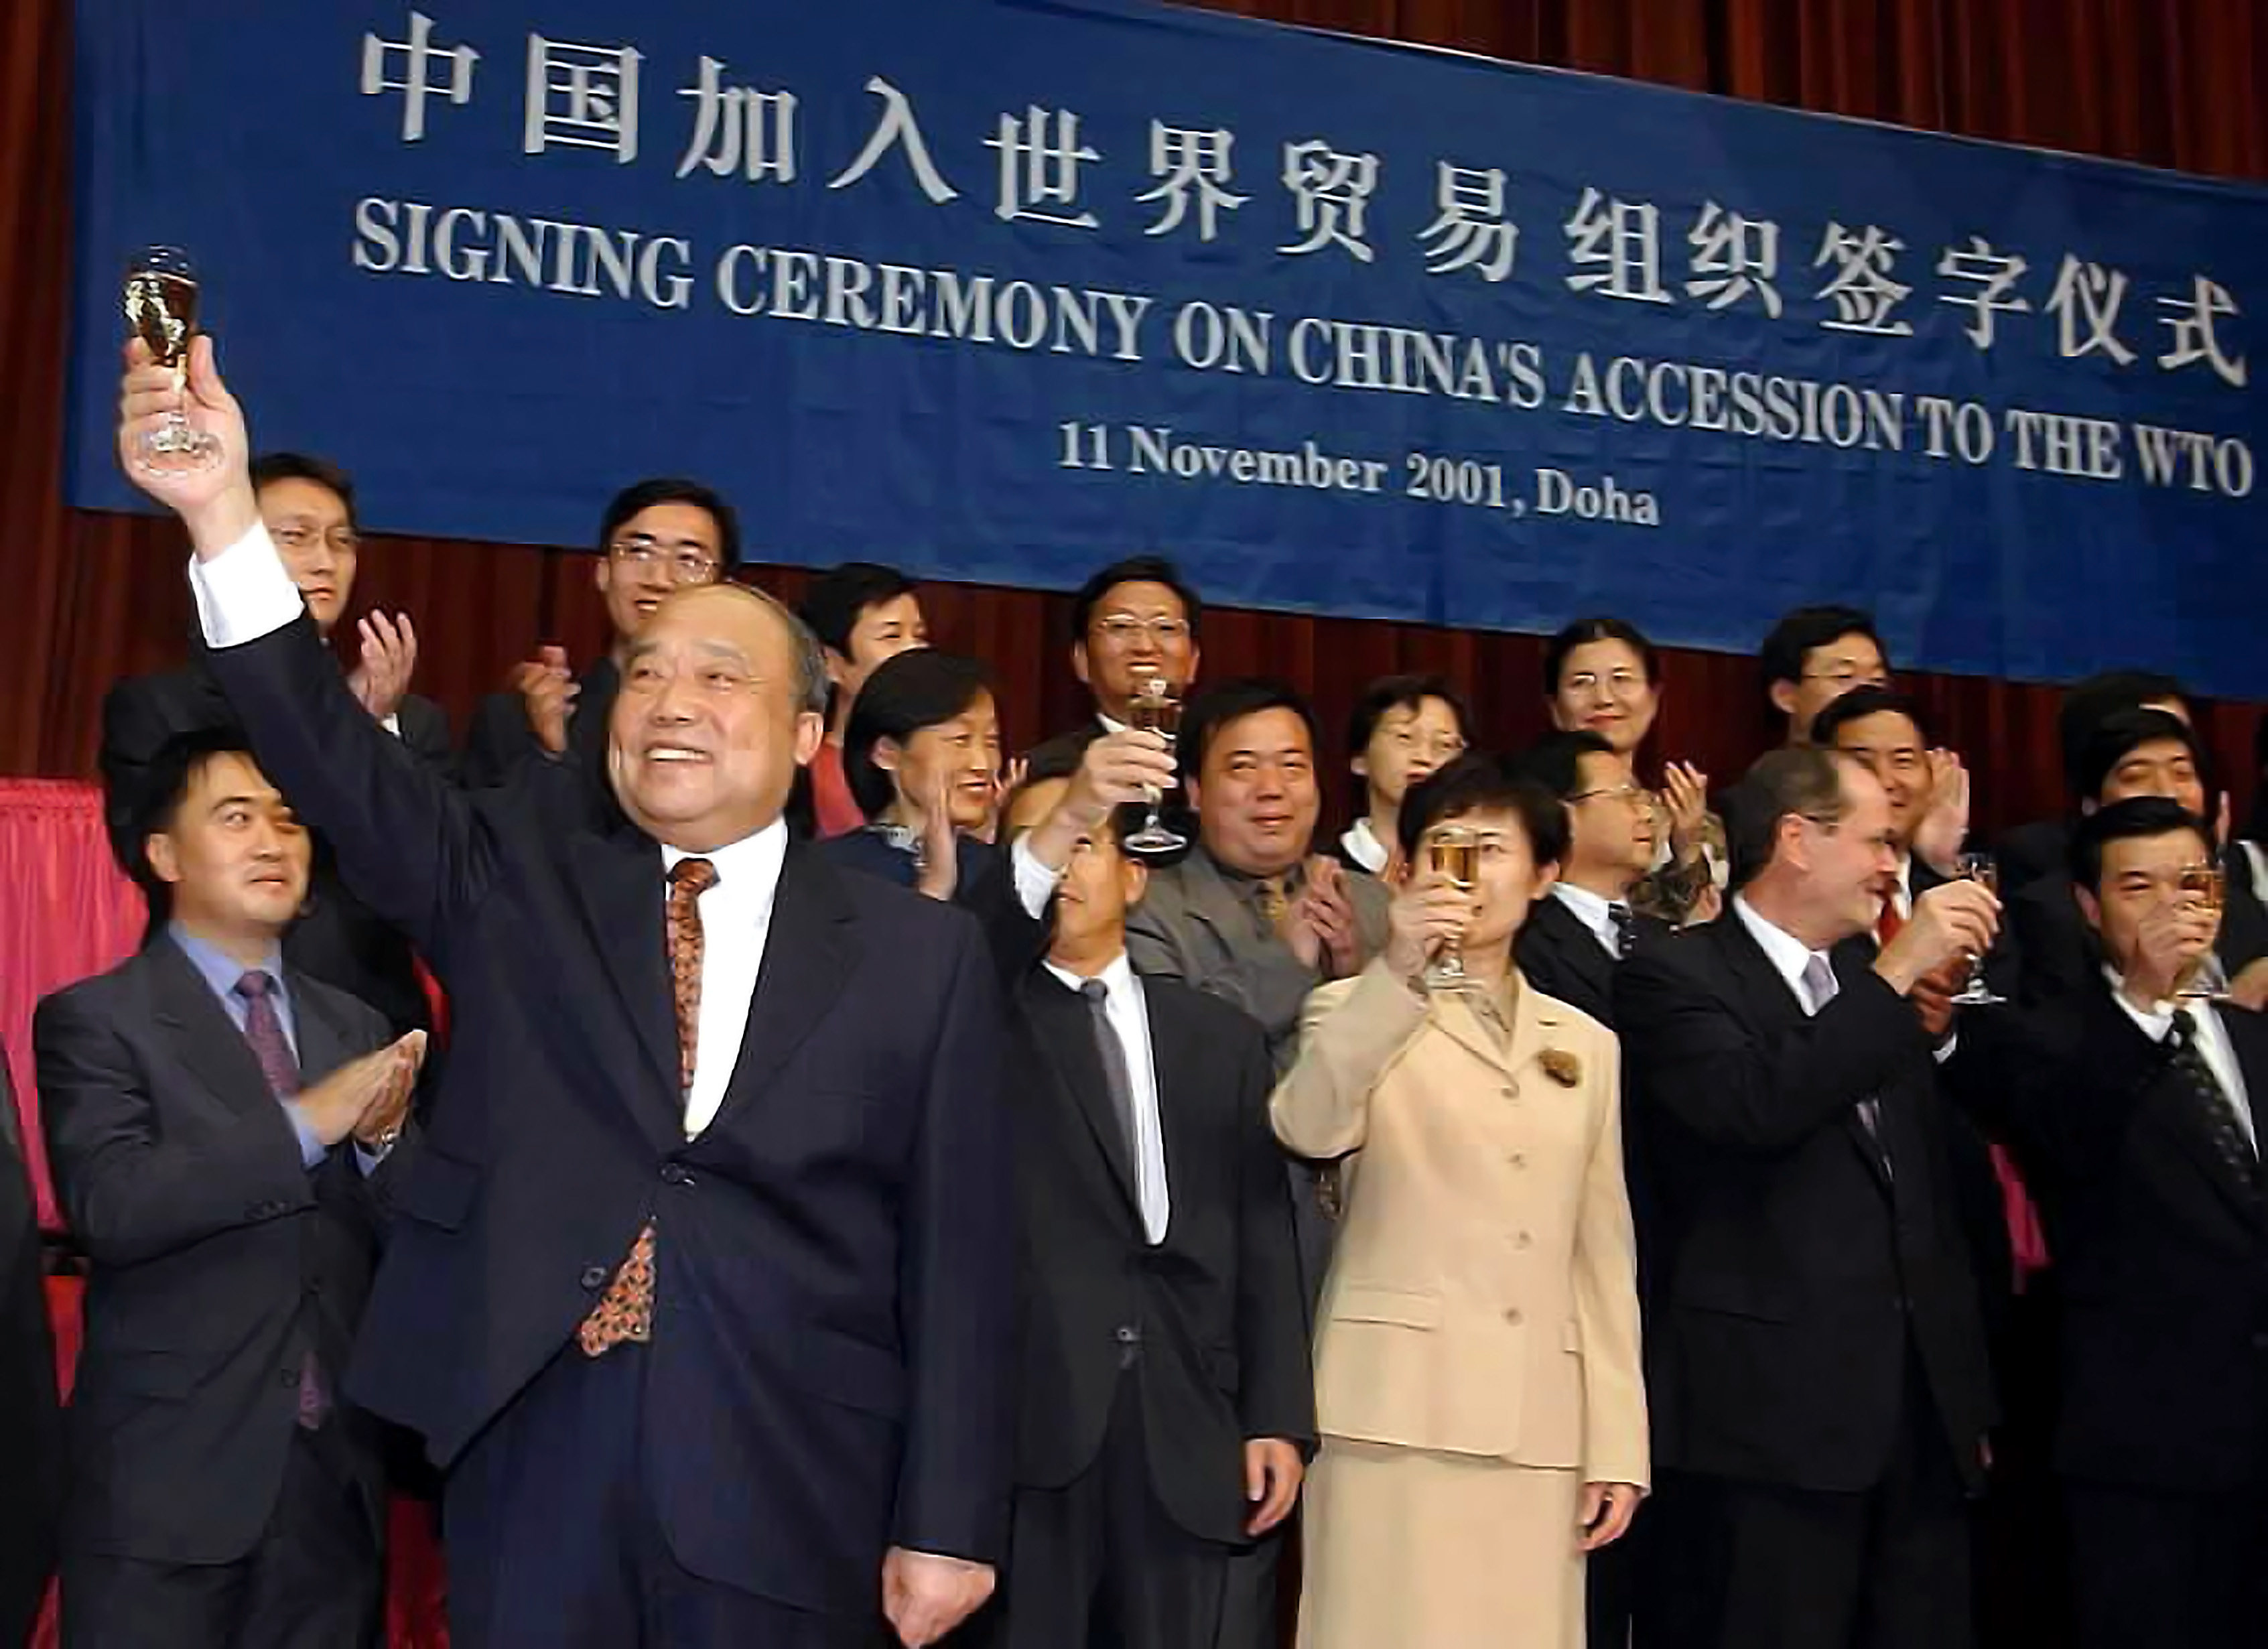 Shi Guangsheng (front left), then Chinese minister of Foreign Trade and Economic Cooperation, celebrates with others after signing the protocol of China’s accession to the World Trade Organization on behalf of the Chinese government, in Doha, Qatar, on November 11, 2001. Photo: Xinhua